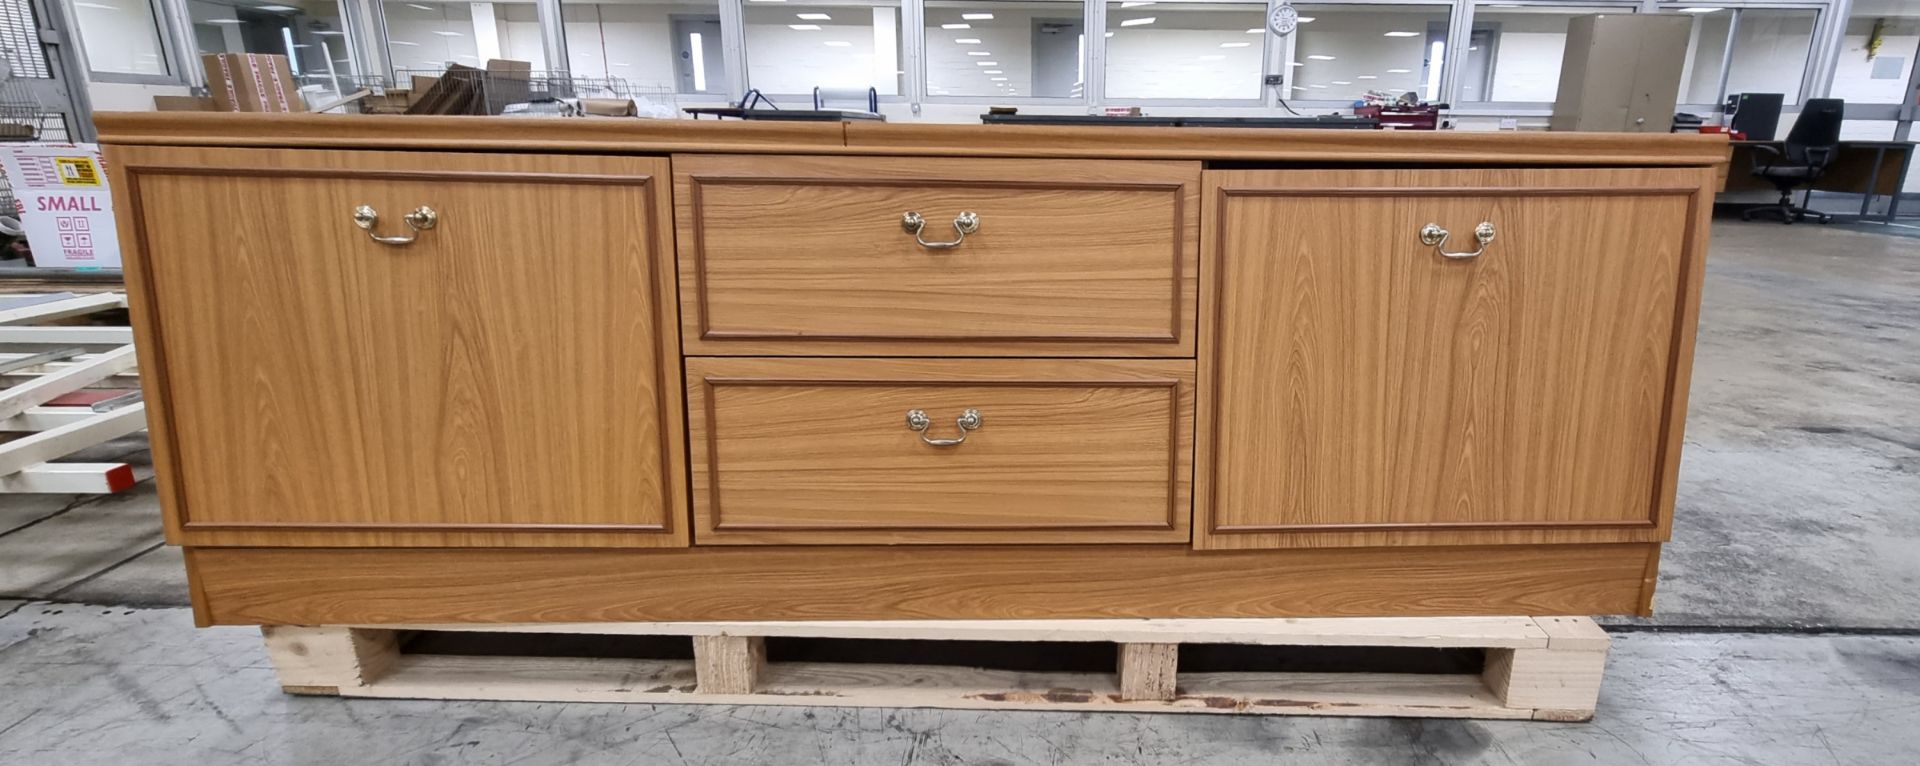 Large wooden dresser display cabinet - dimensions: 183x43x182cm - Image 4 of 4